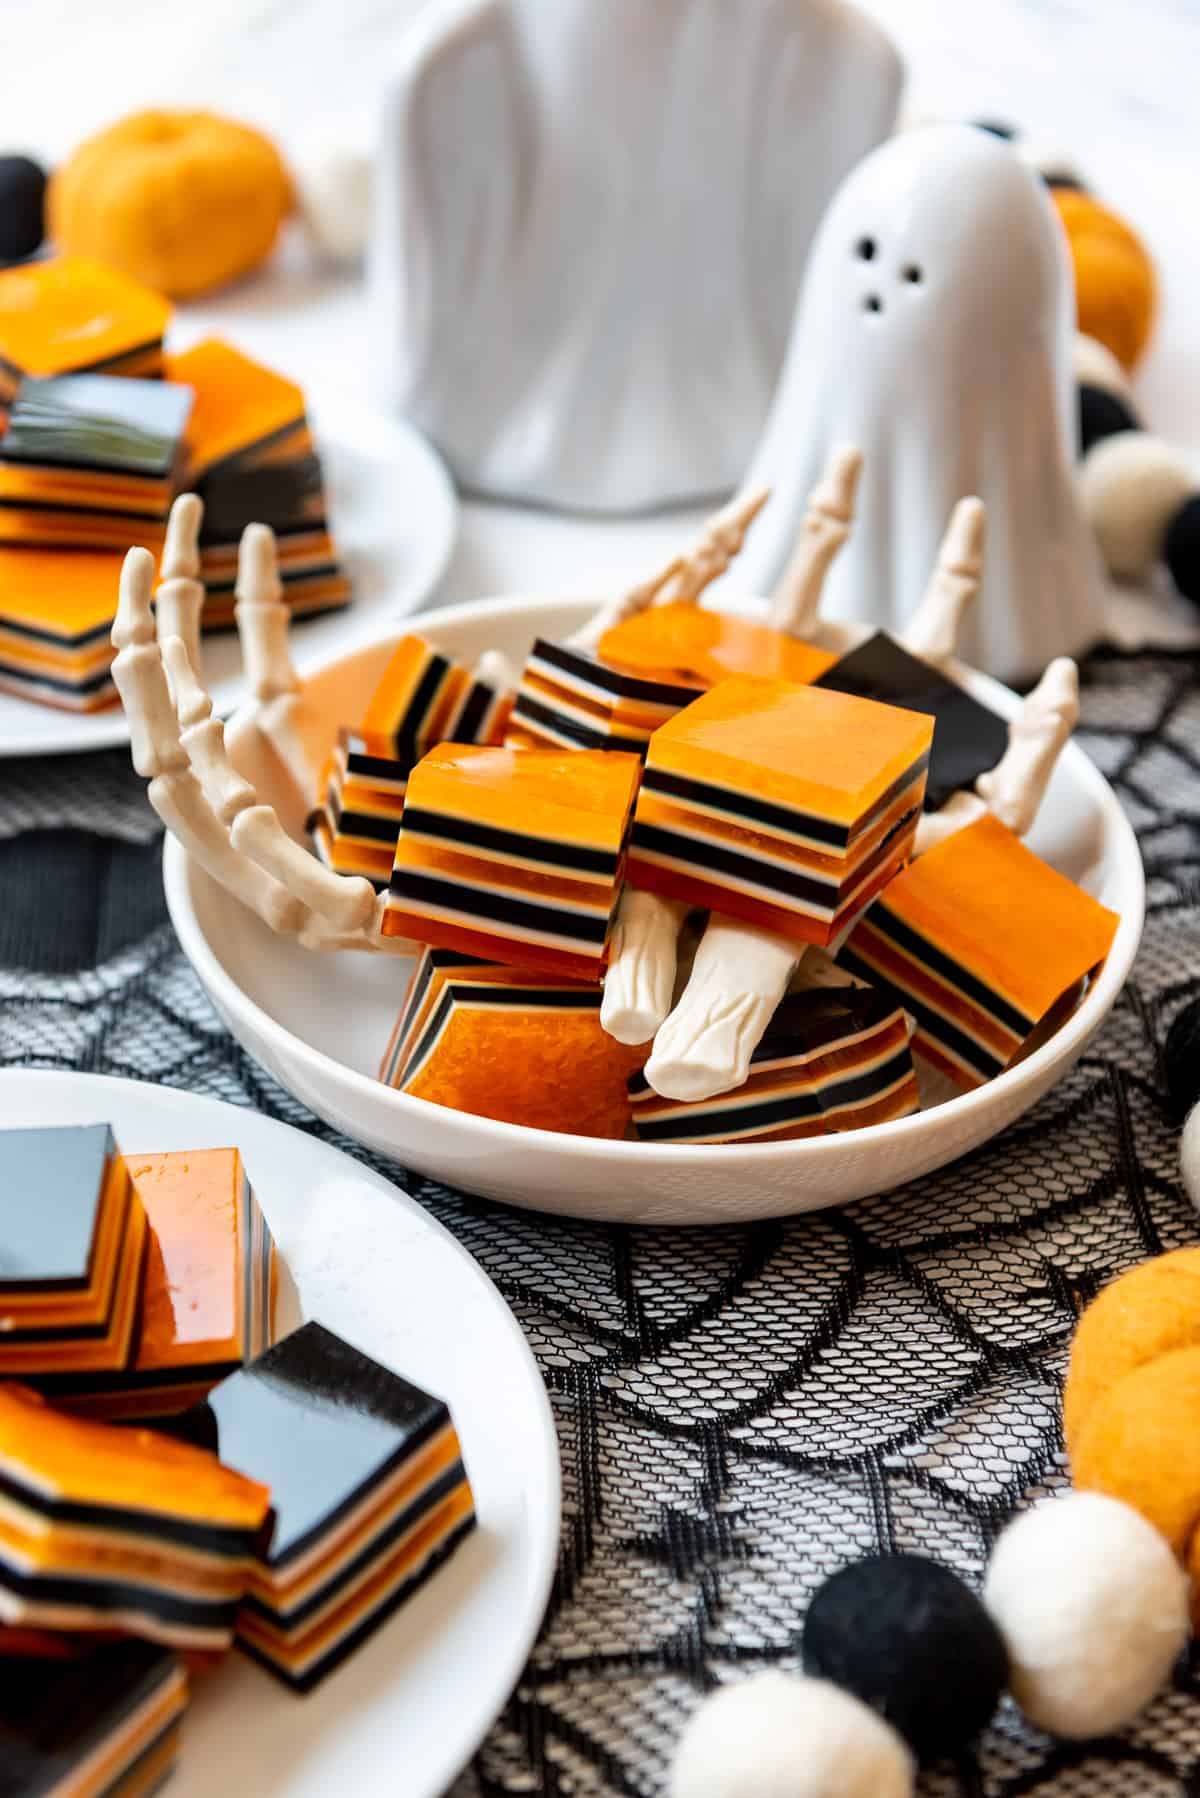 Layered cubes of orange and black jello in a bowl surrounded by Halloween decorations.